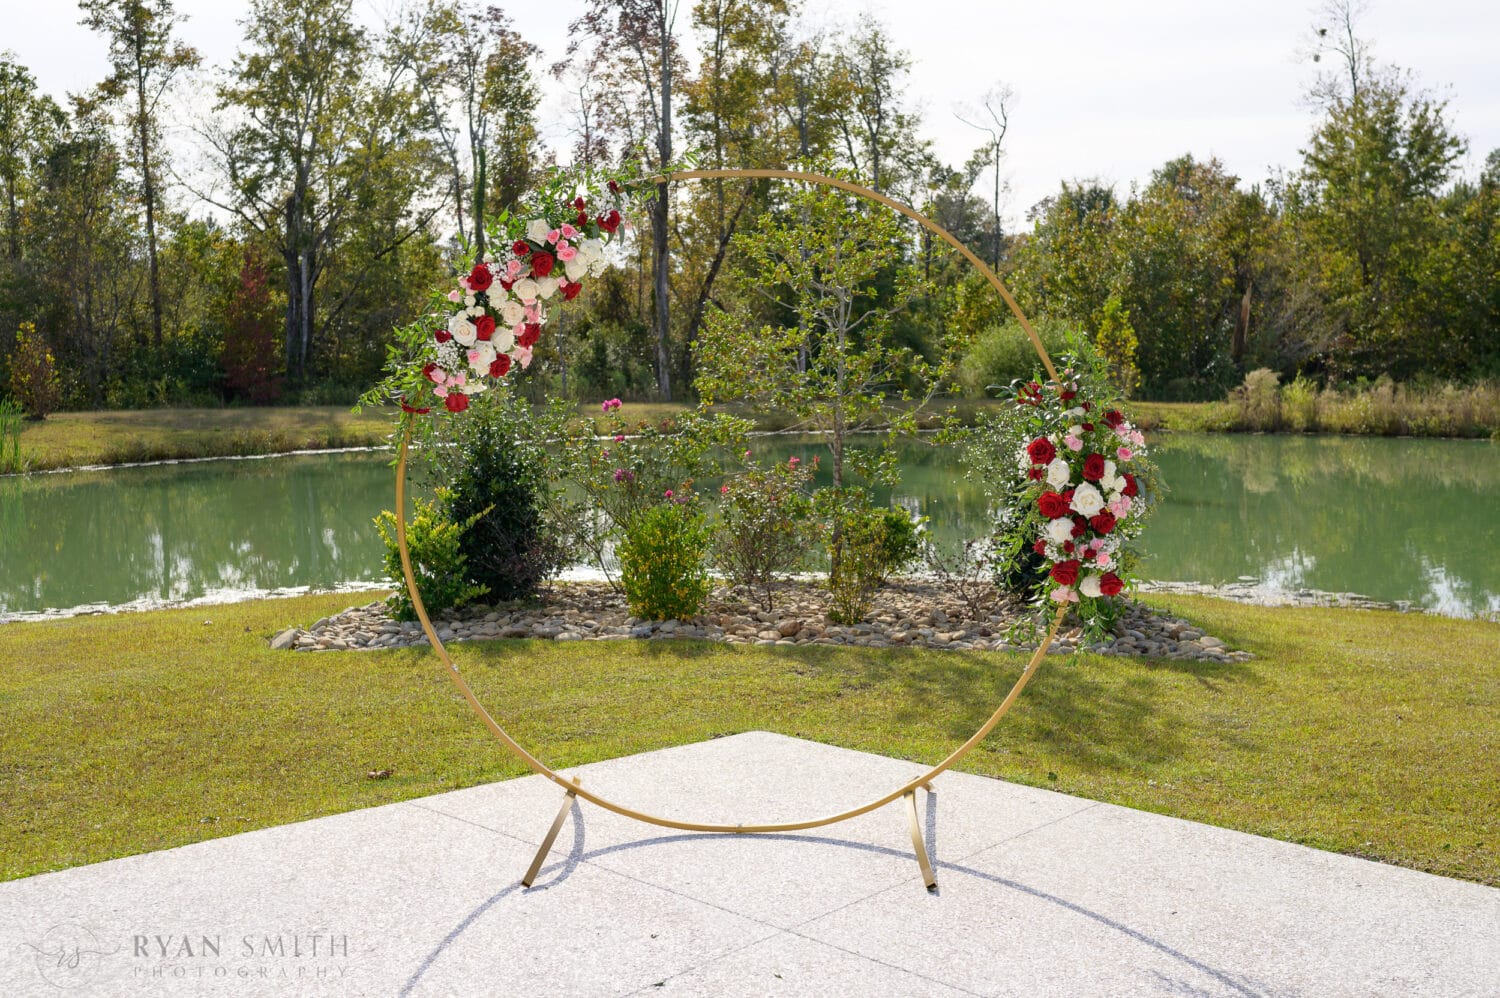 Ceremony arch with flowers - The Venue at White Oaks Farm